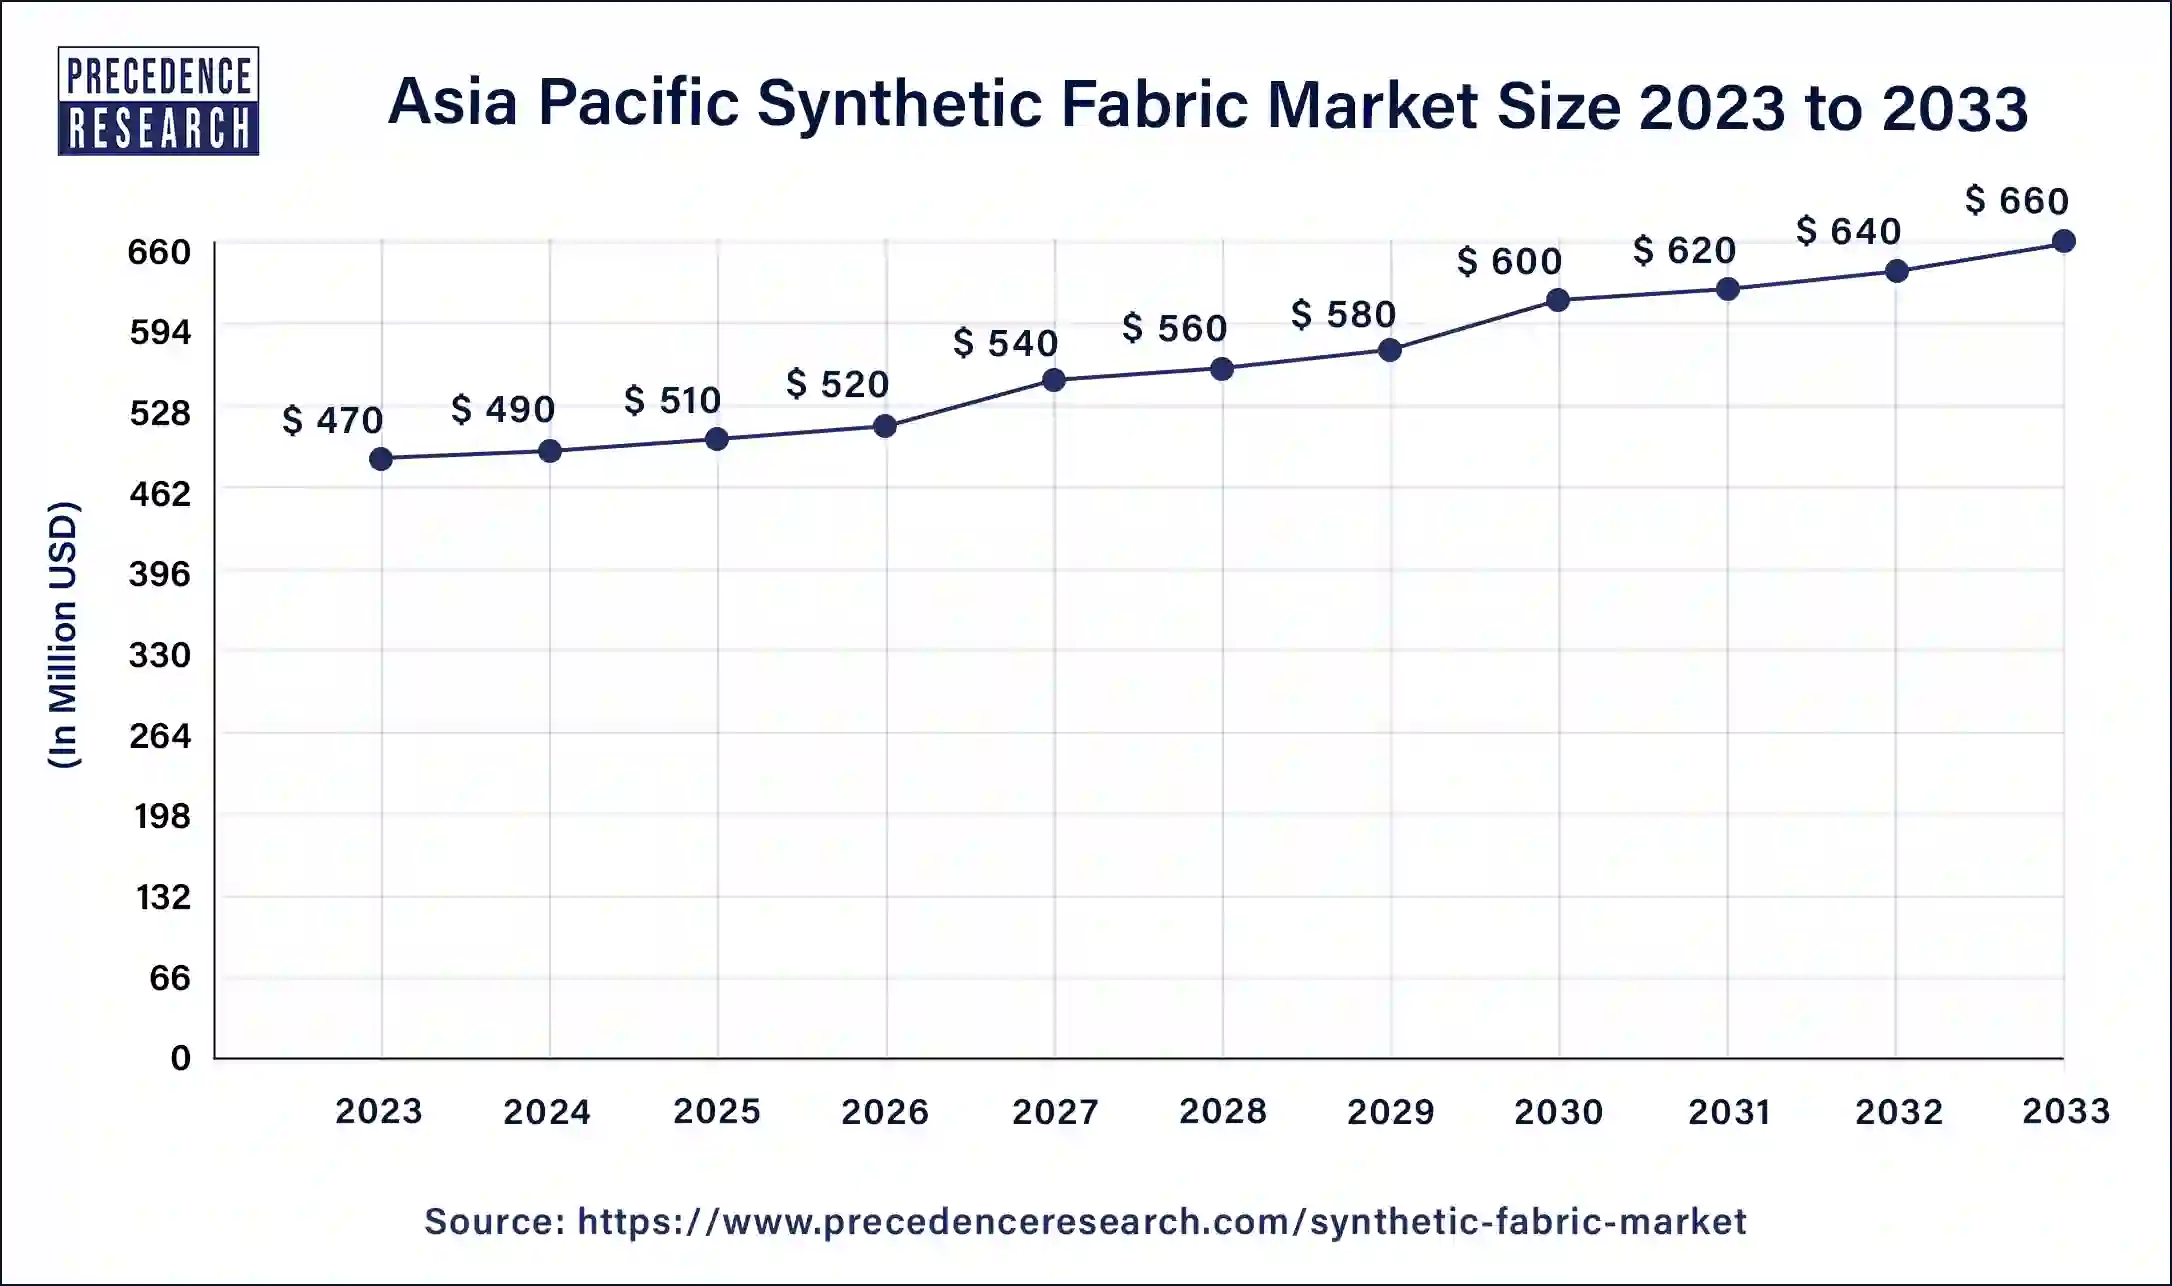 Asia Pacific Synthetic Fabric Market Size 2024 to 2033